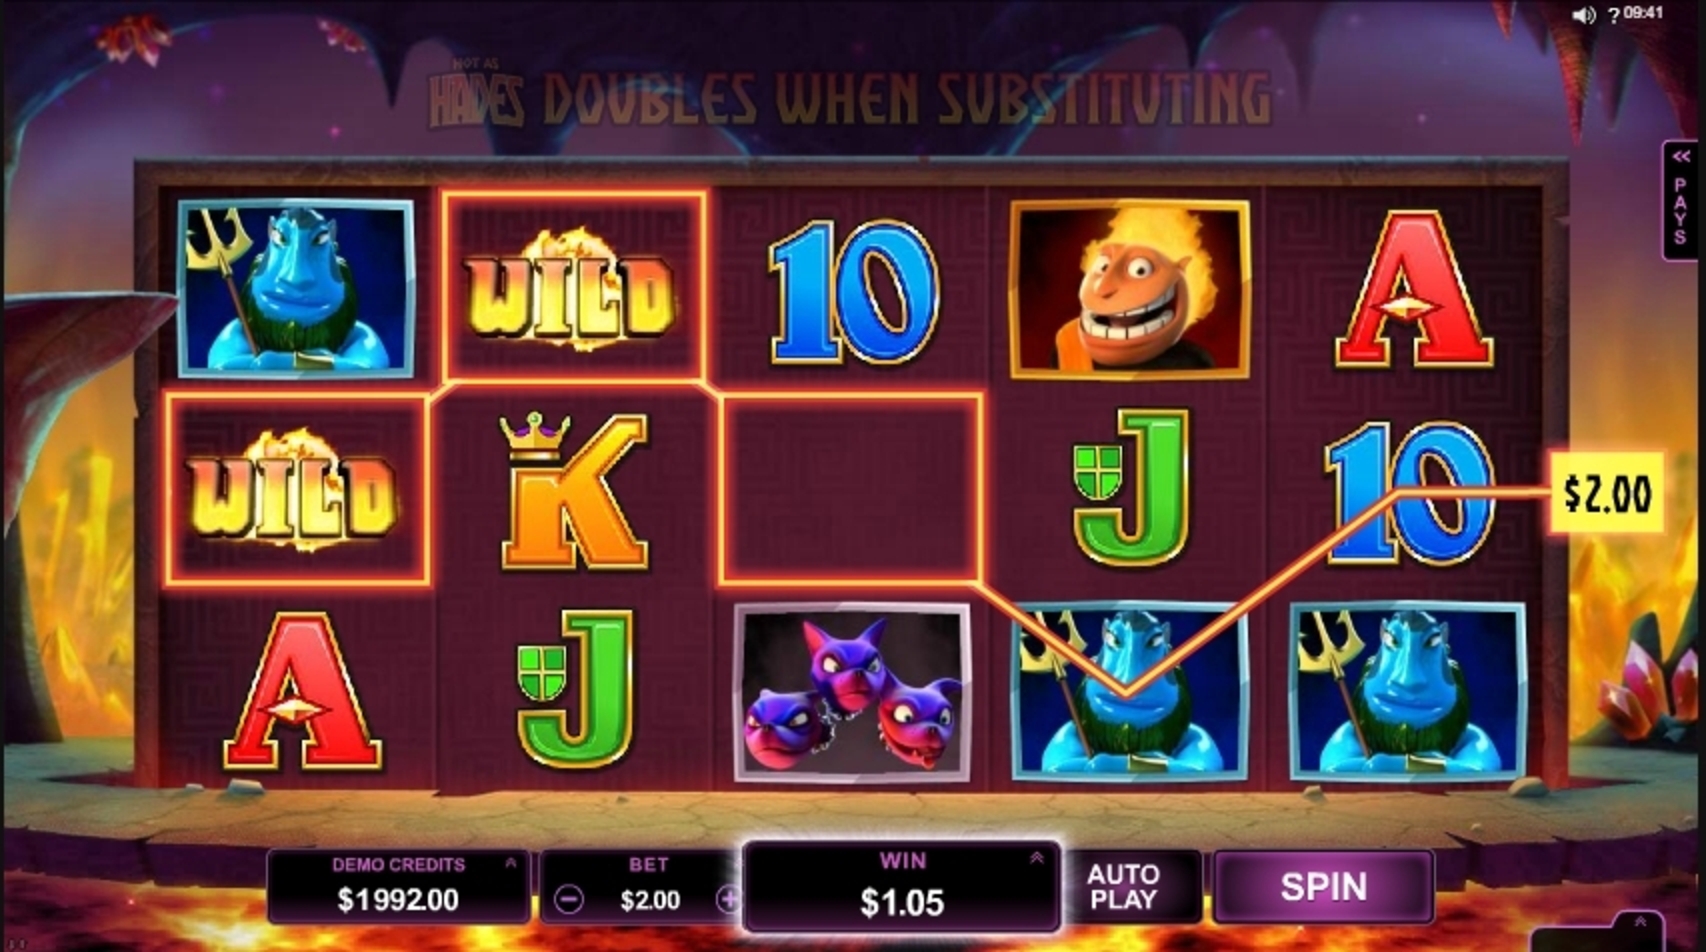 Win Money in Hot as Hades Free Slot Game by Microgaming